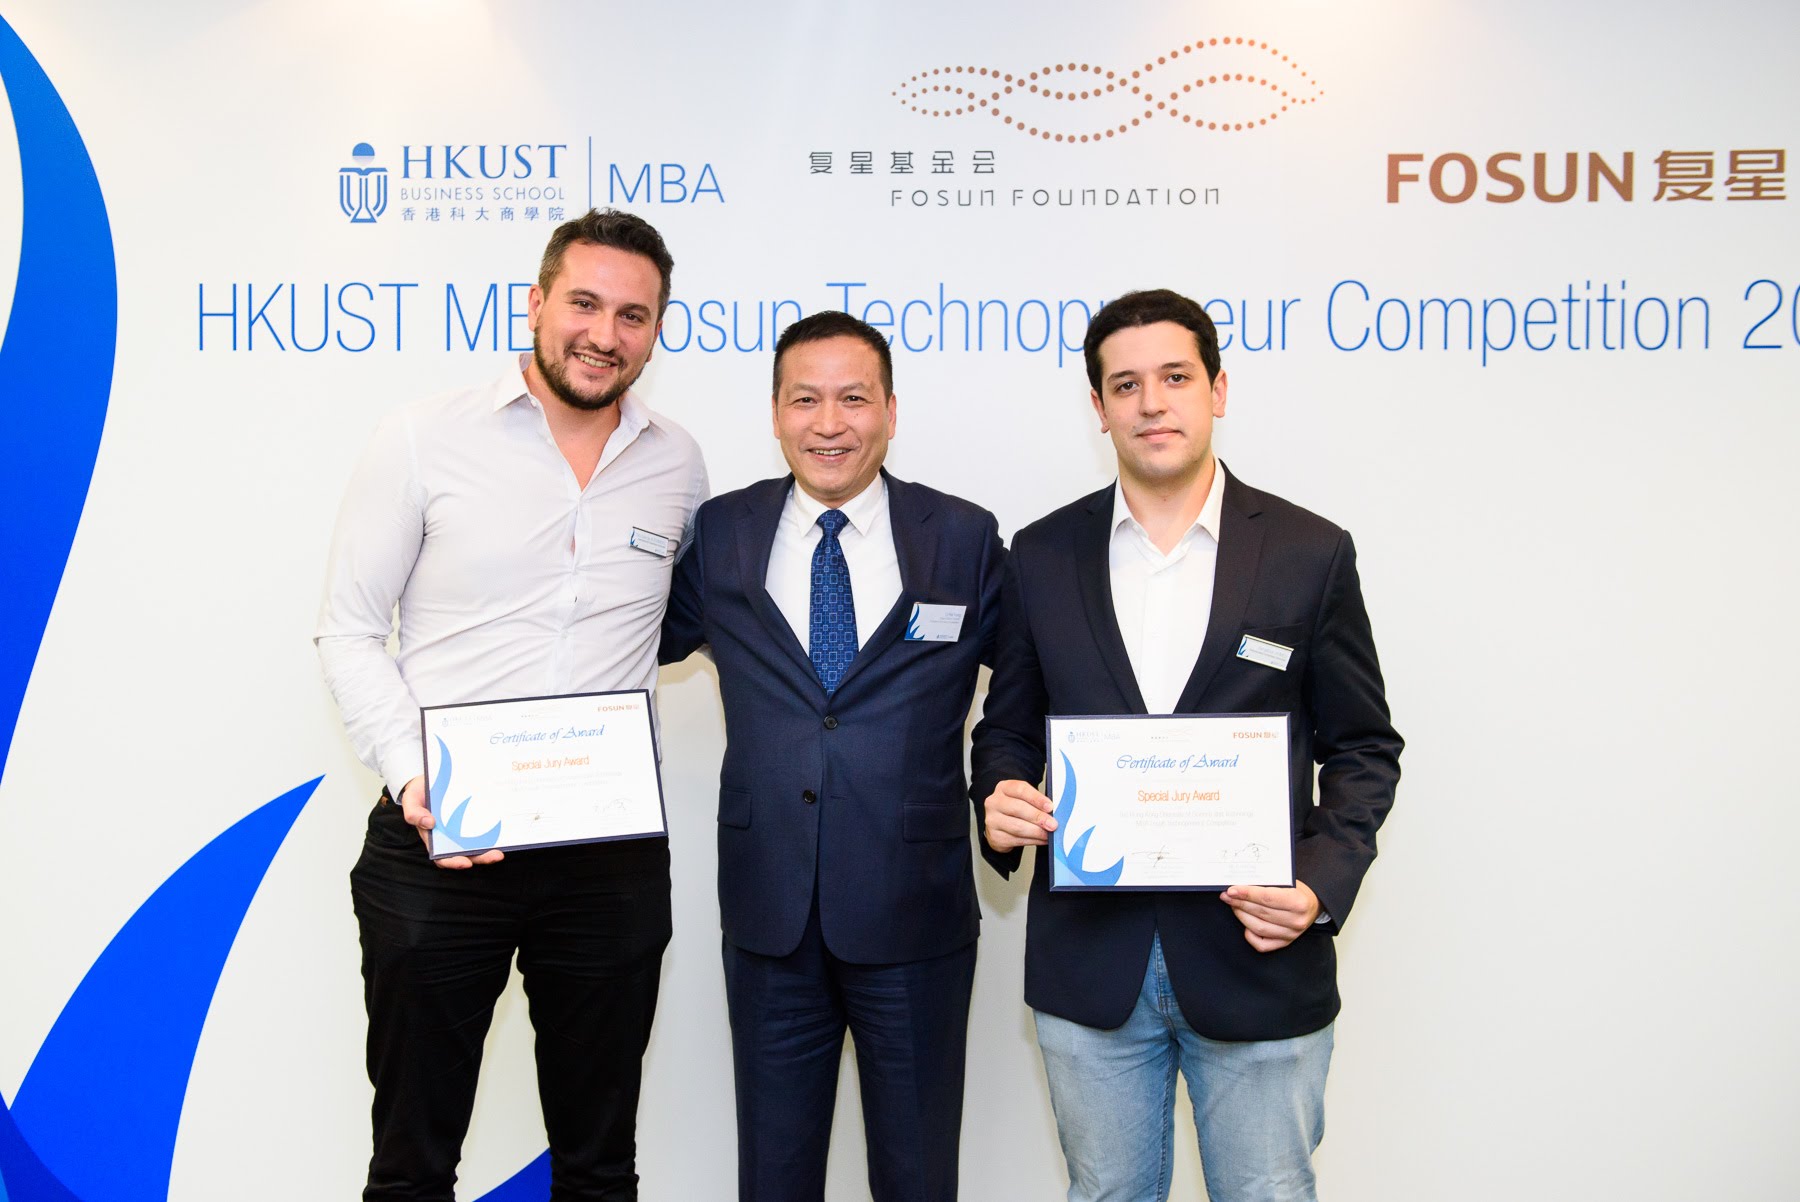 3DK Tech, co-founded by Alex (left), won the Special Jury Award at HKUST MBA Fosun Technopreneur Competition in 2018